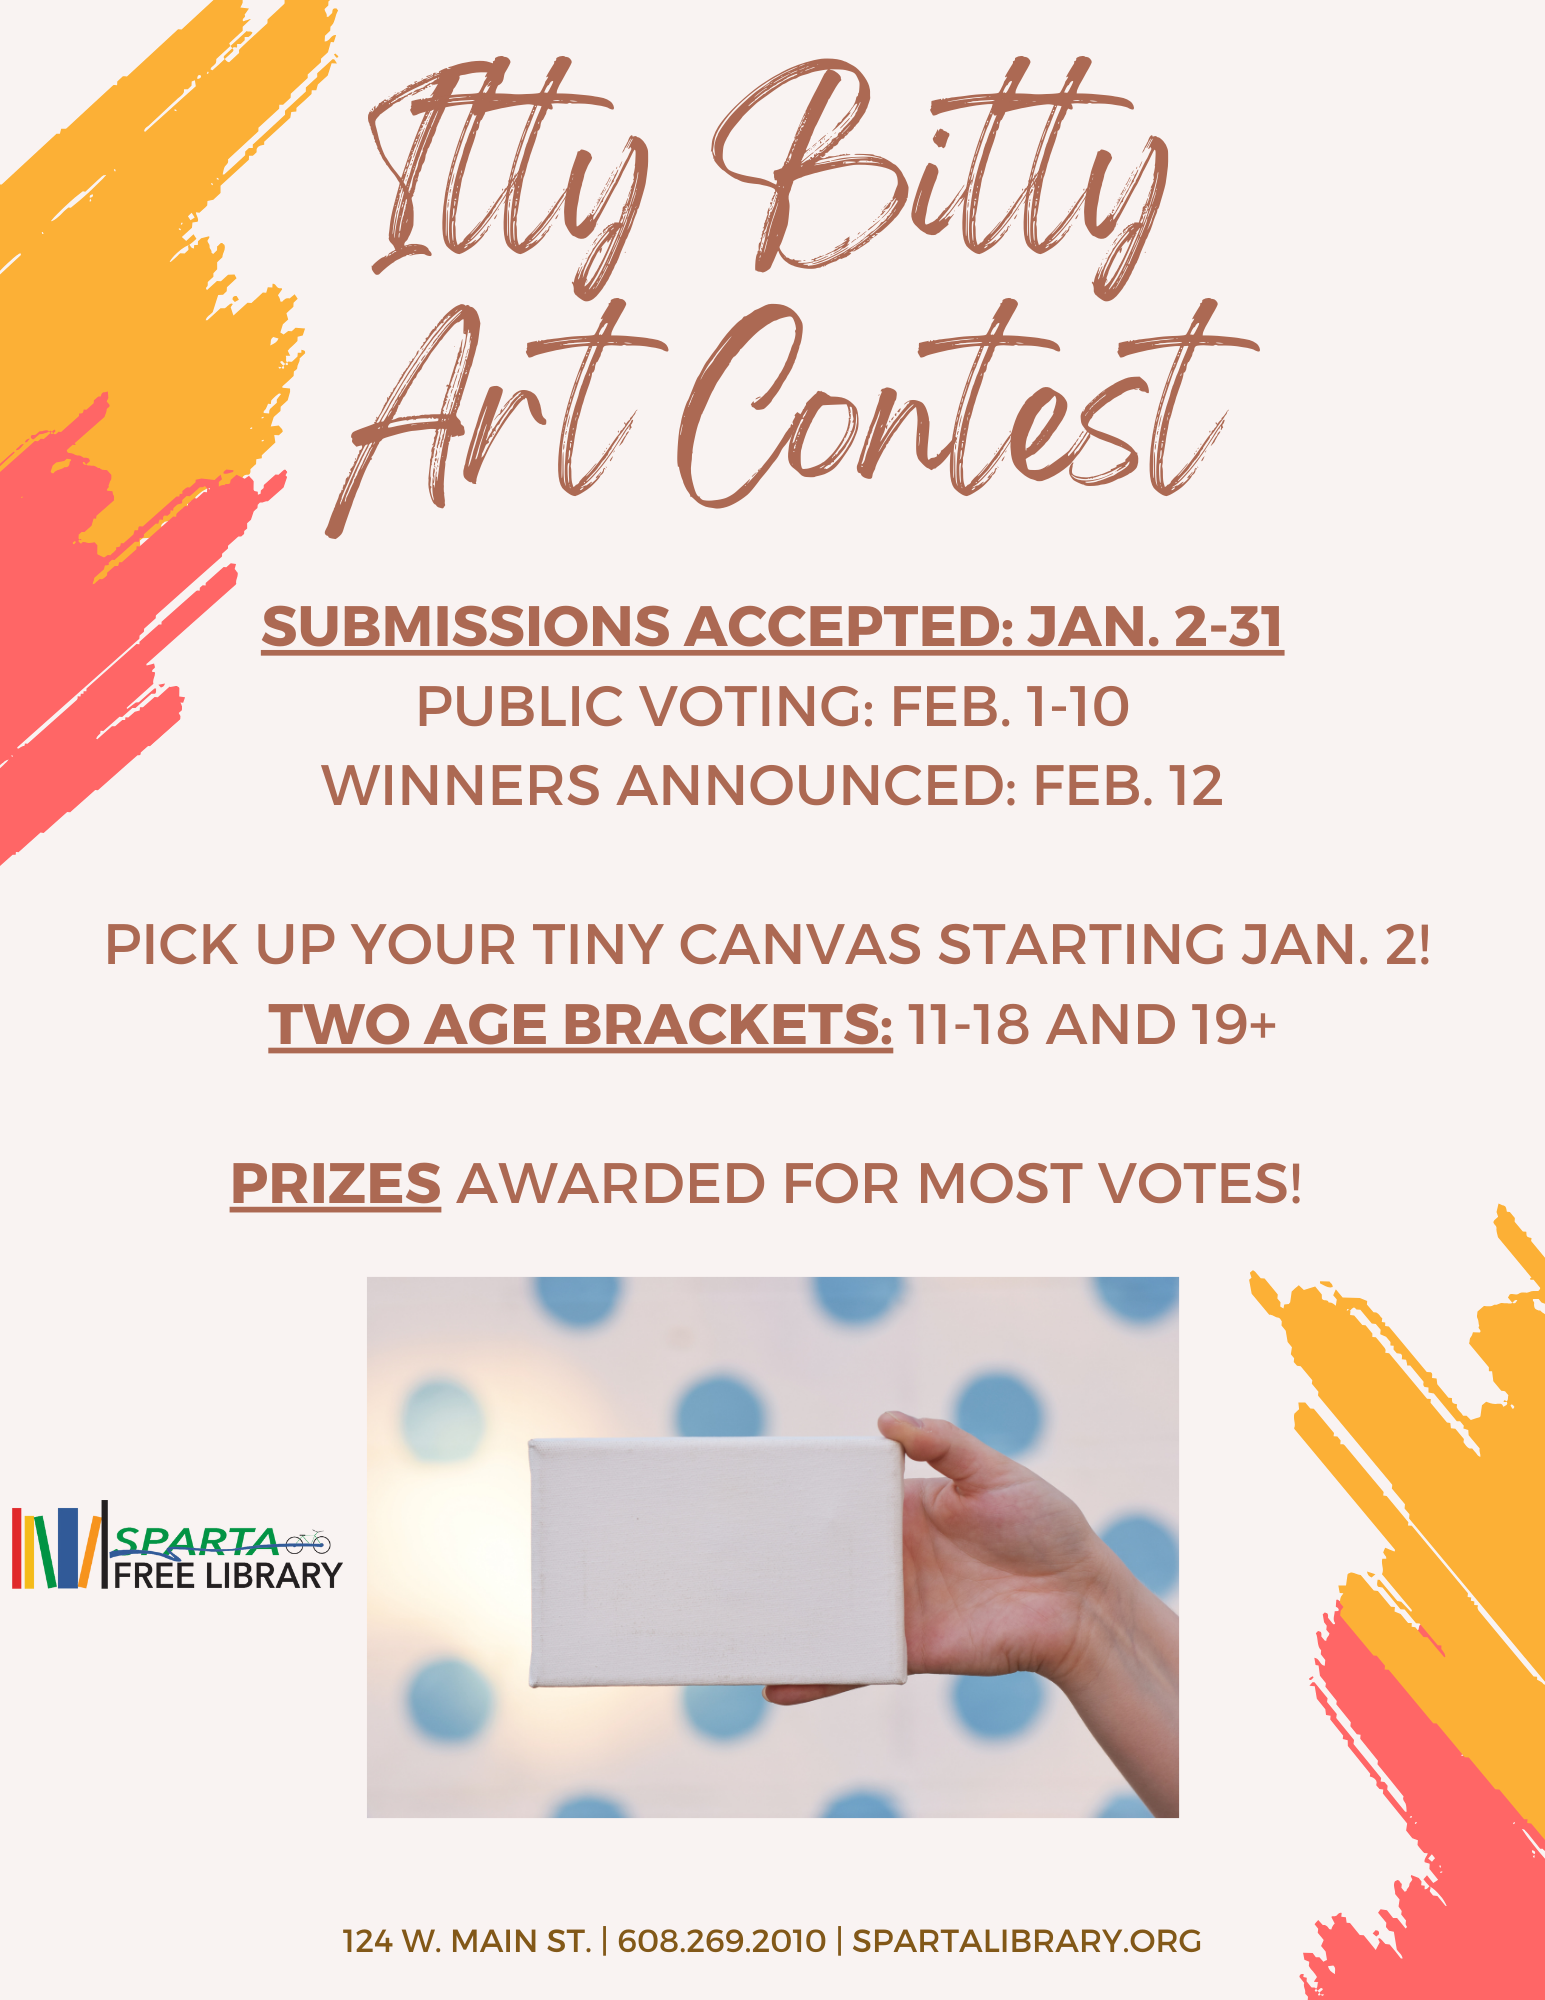 Itty bitty artwork is just as important as any giant masterpiece! Pick up your tiny canvas at the library starting on January 2. Then, return it to the library before January 31 to be entered into our art contest. Art will be displayed in the library and public voting will occur from February 1-10.<br />
Winners announced on February 12<br />
Two age brackets: 11-18 and 19+<br />
Prizes awarded for most votes